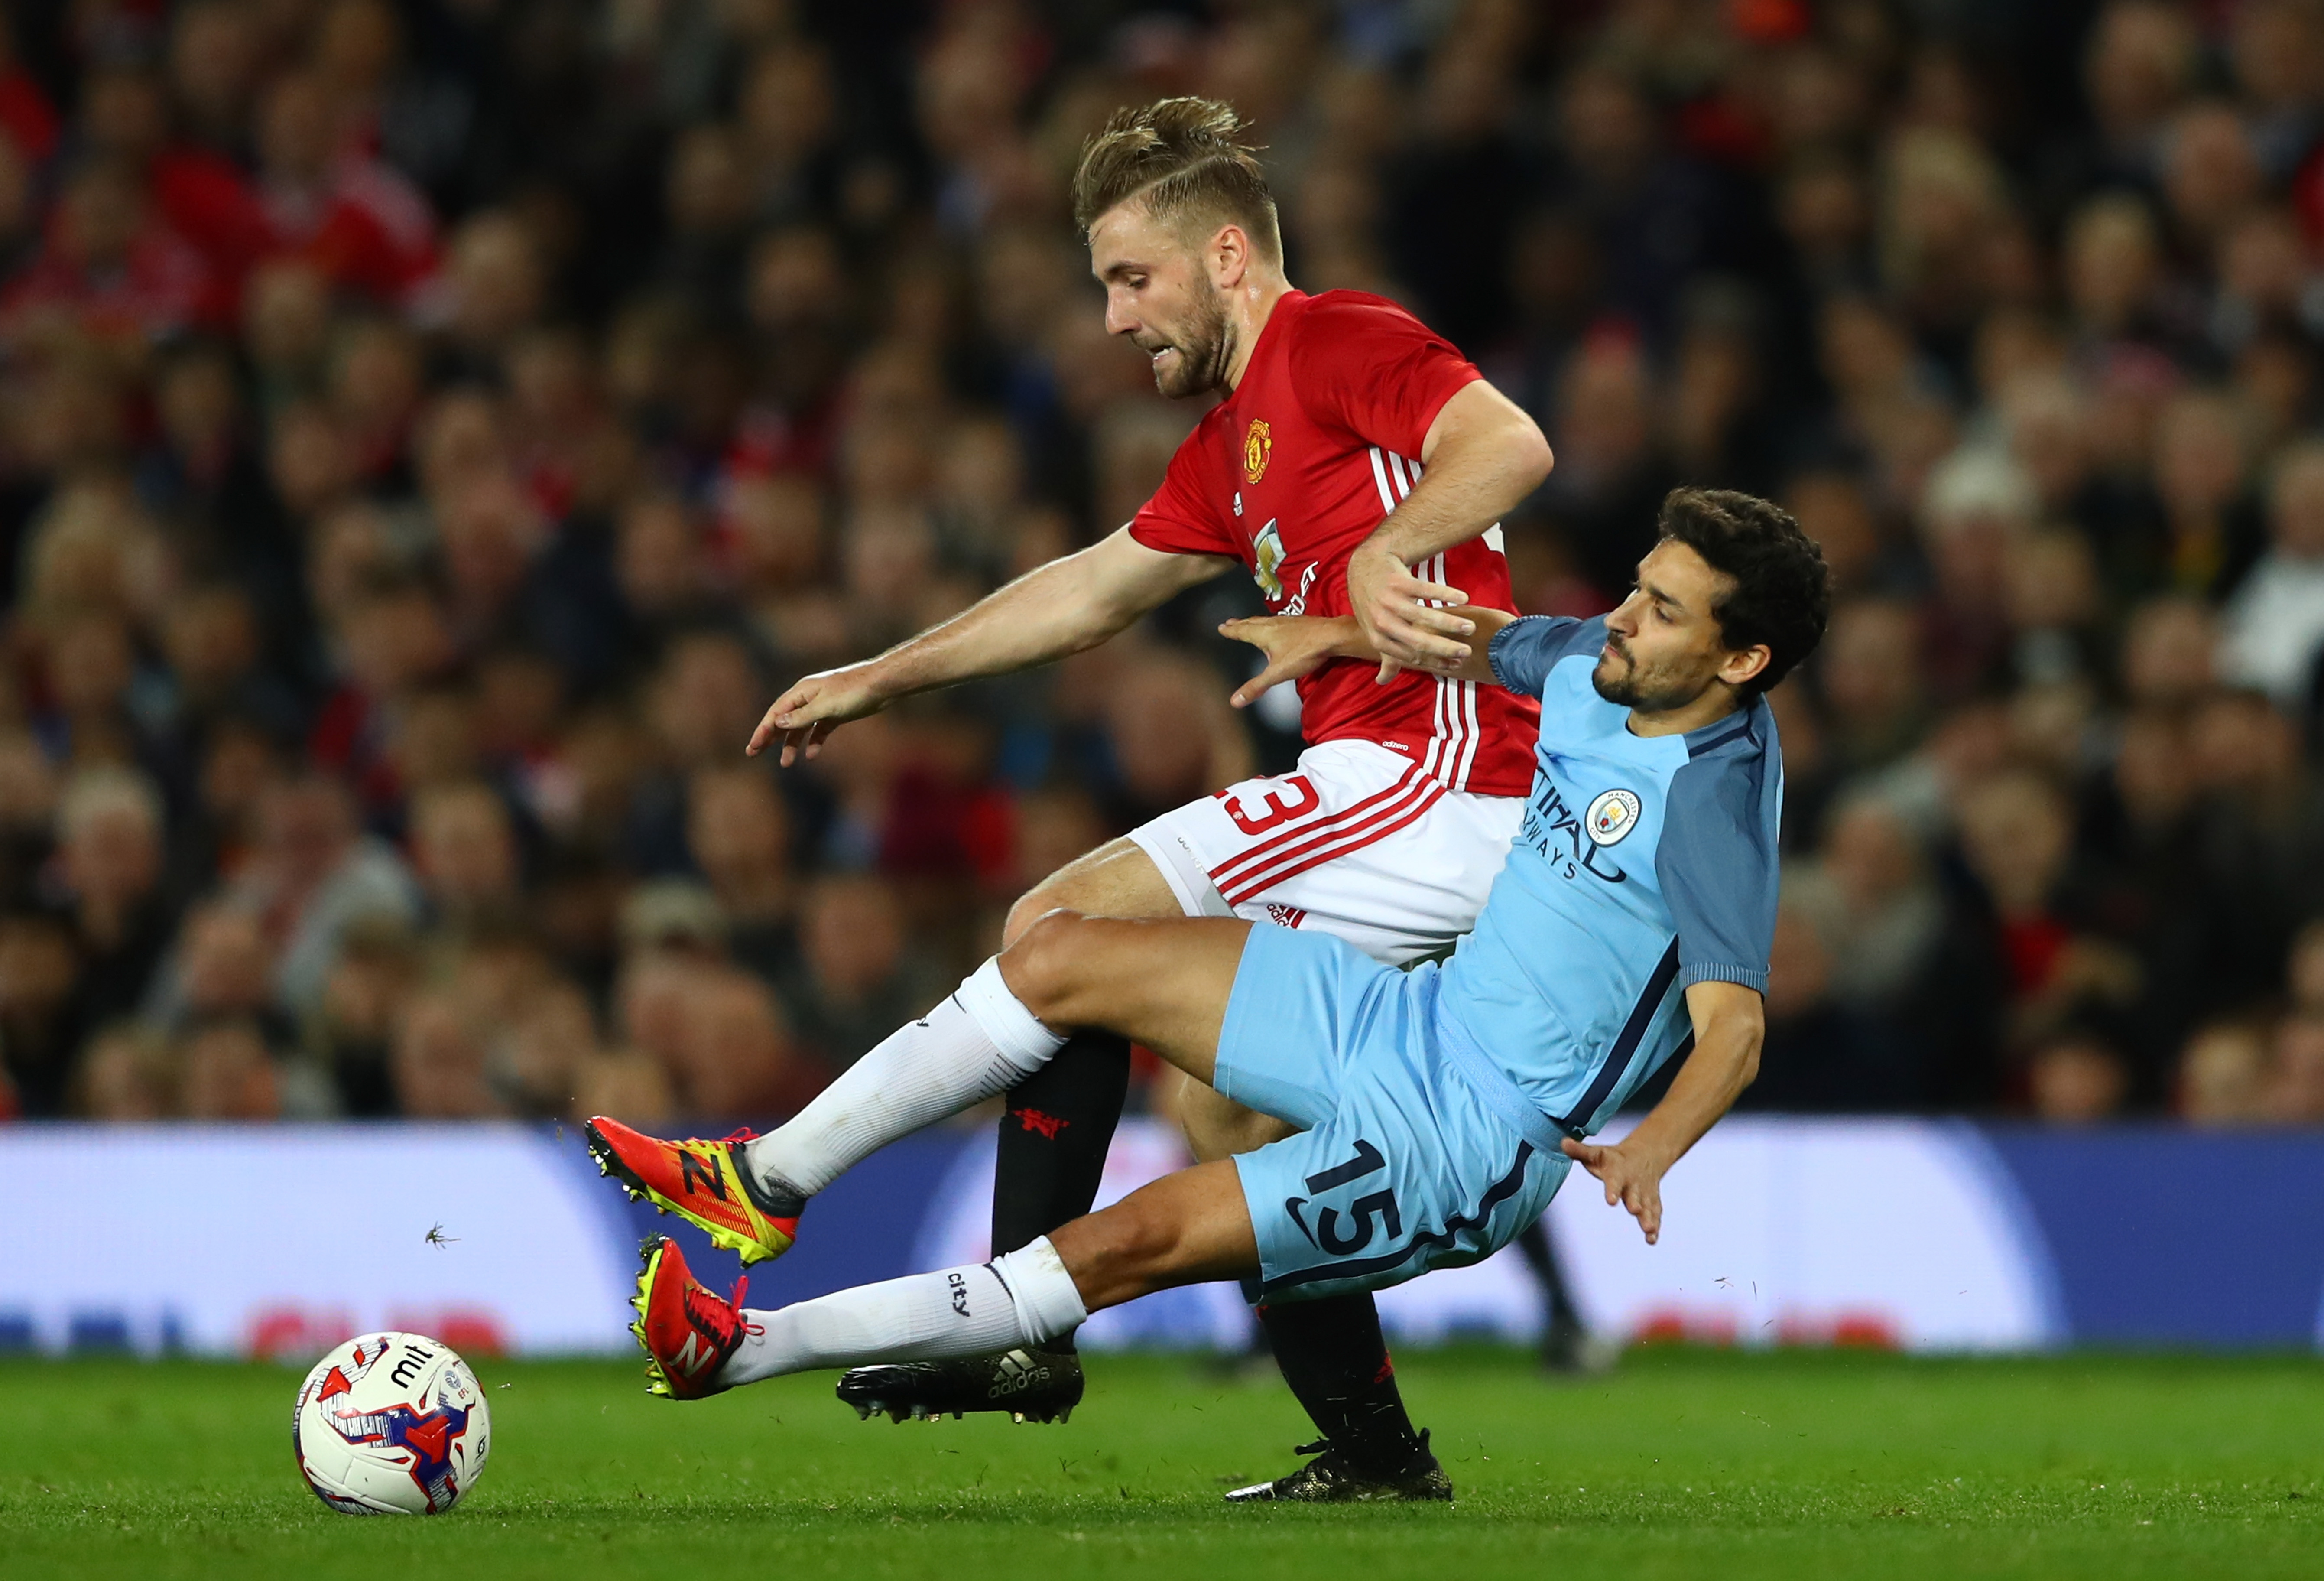 MANCHESTER, ENGLAND - OCTOBER 26: Luke Shaw of Manchester United (L) and Jesus Navas of Manchester City (R) battle for possession during the EFL Cup fourth round match between Manchester United and Manchester City at Old Trafford on October 26, 2016 in Manchester, England.  (Photo by Michael Steele/Getty Images)